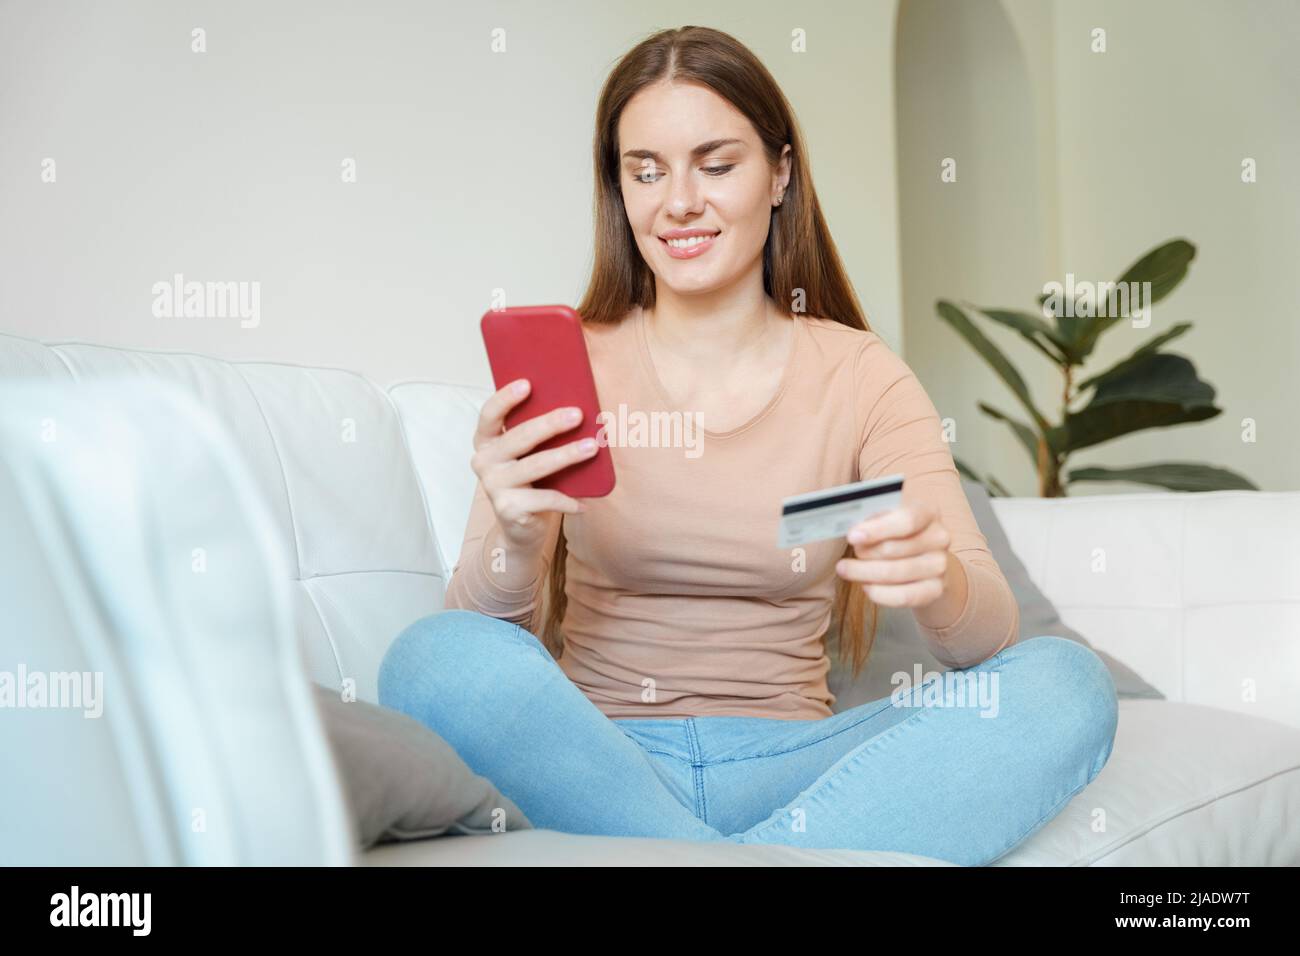 Young teenager woman doing online purchase using phone and credit card at home Stock Photo